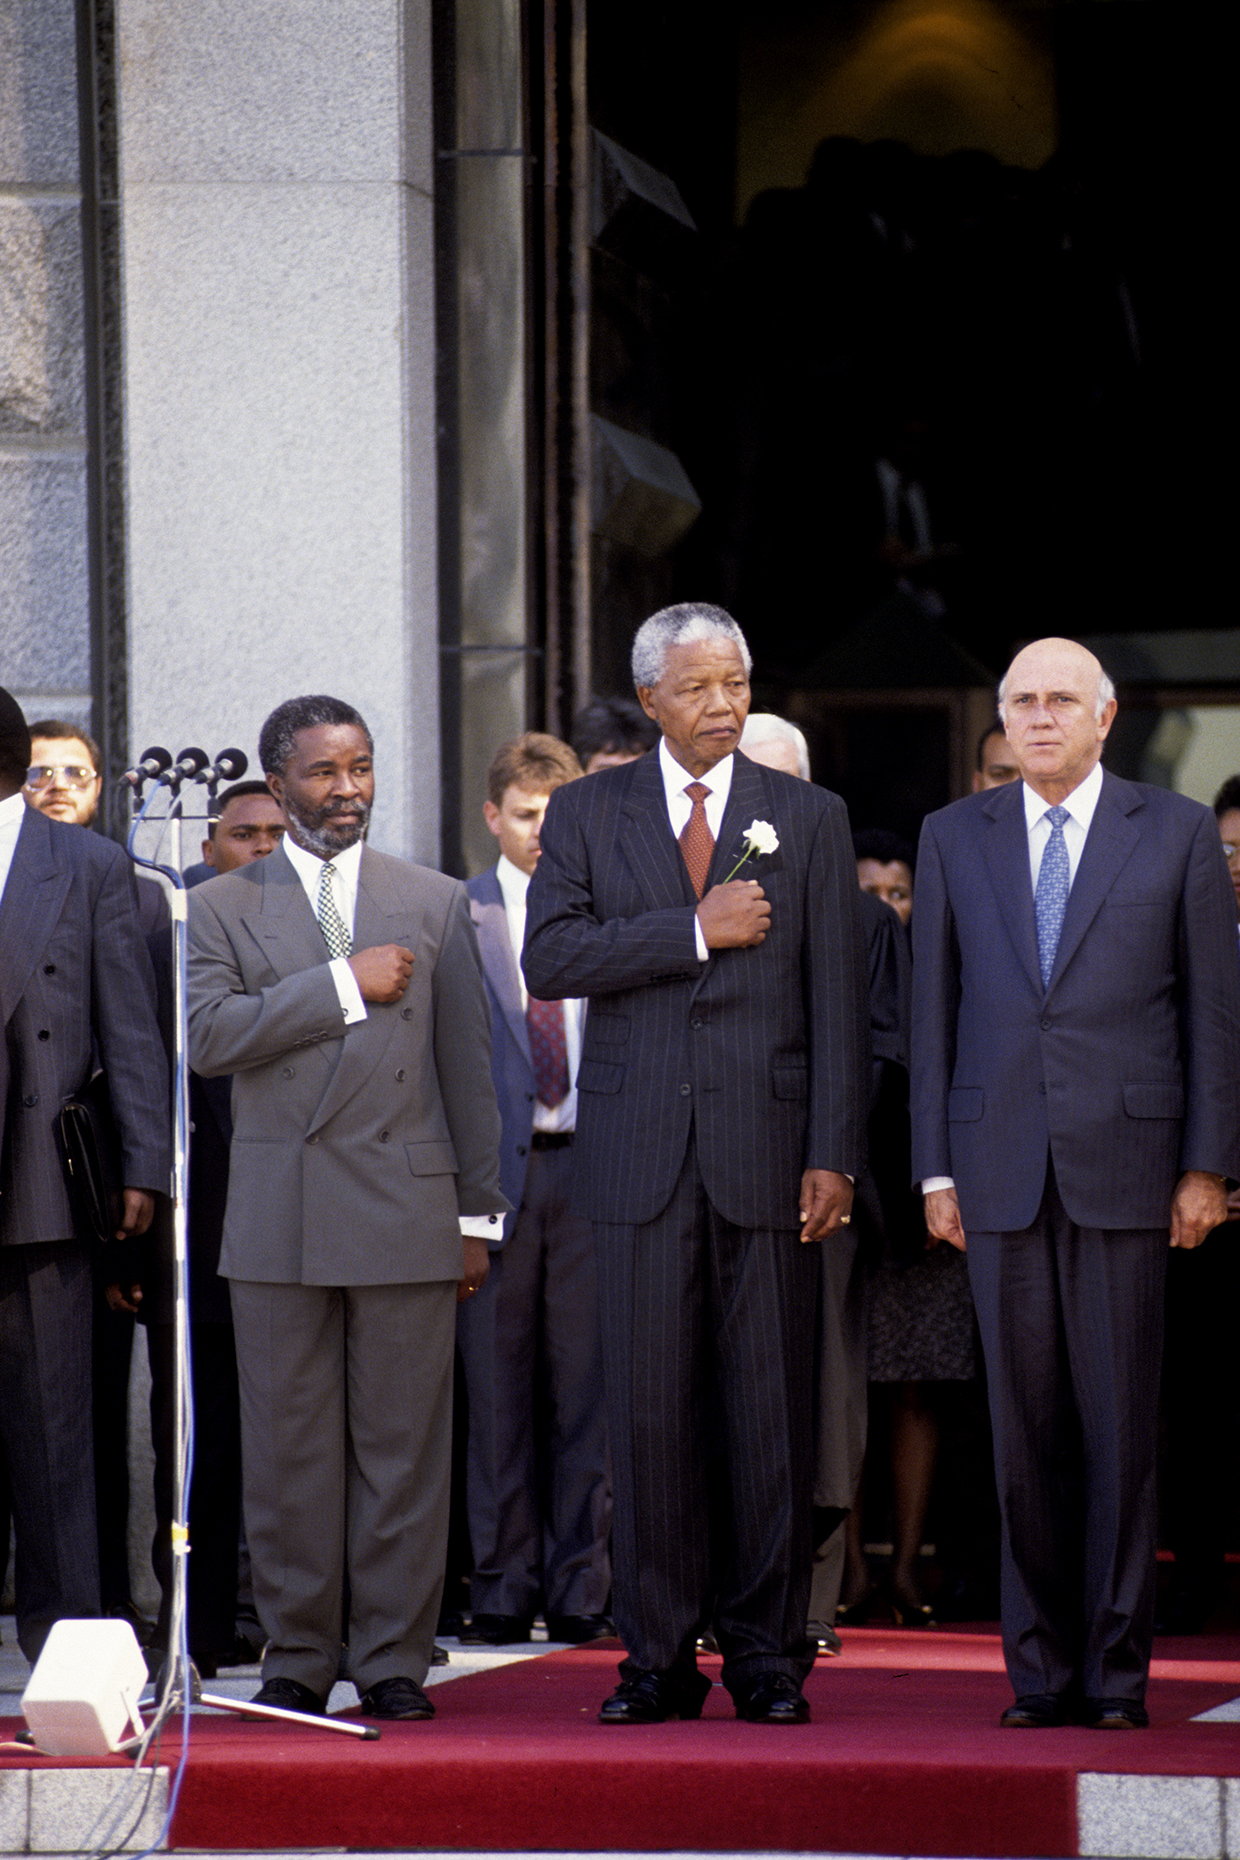 Oliver Tambo, left, with the joint recipients of the 1993 Nobel Peace Prize, Nelson Mandela and FW de Klerk.